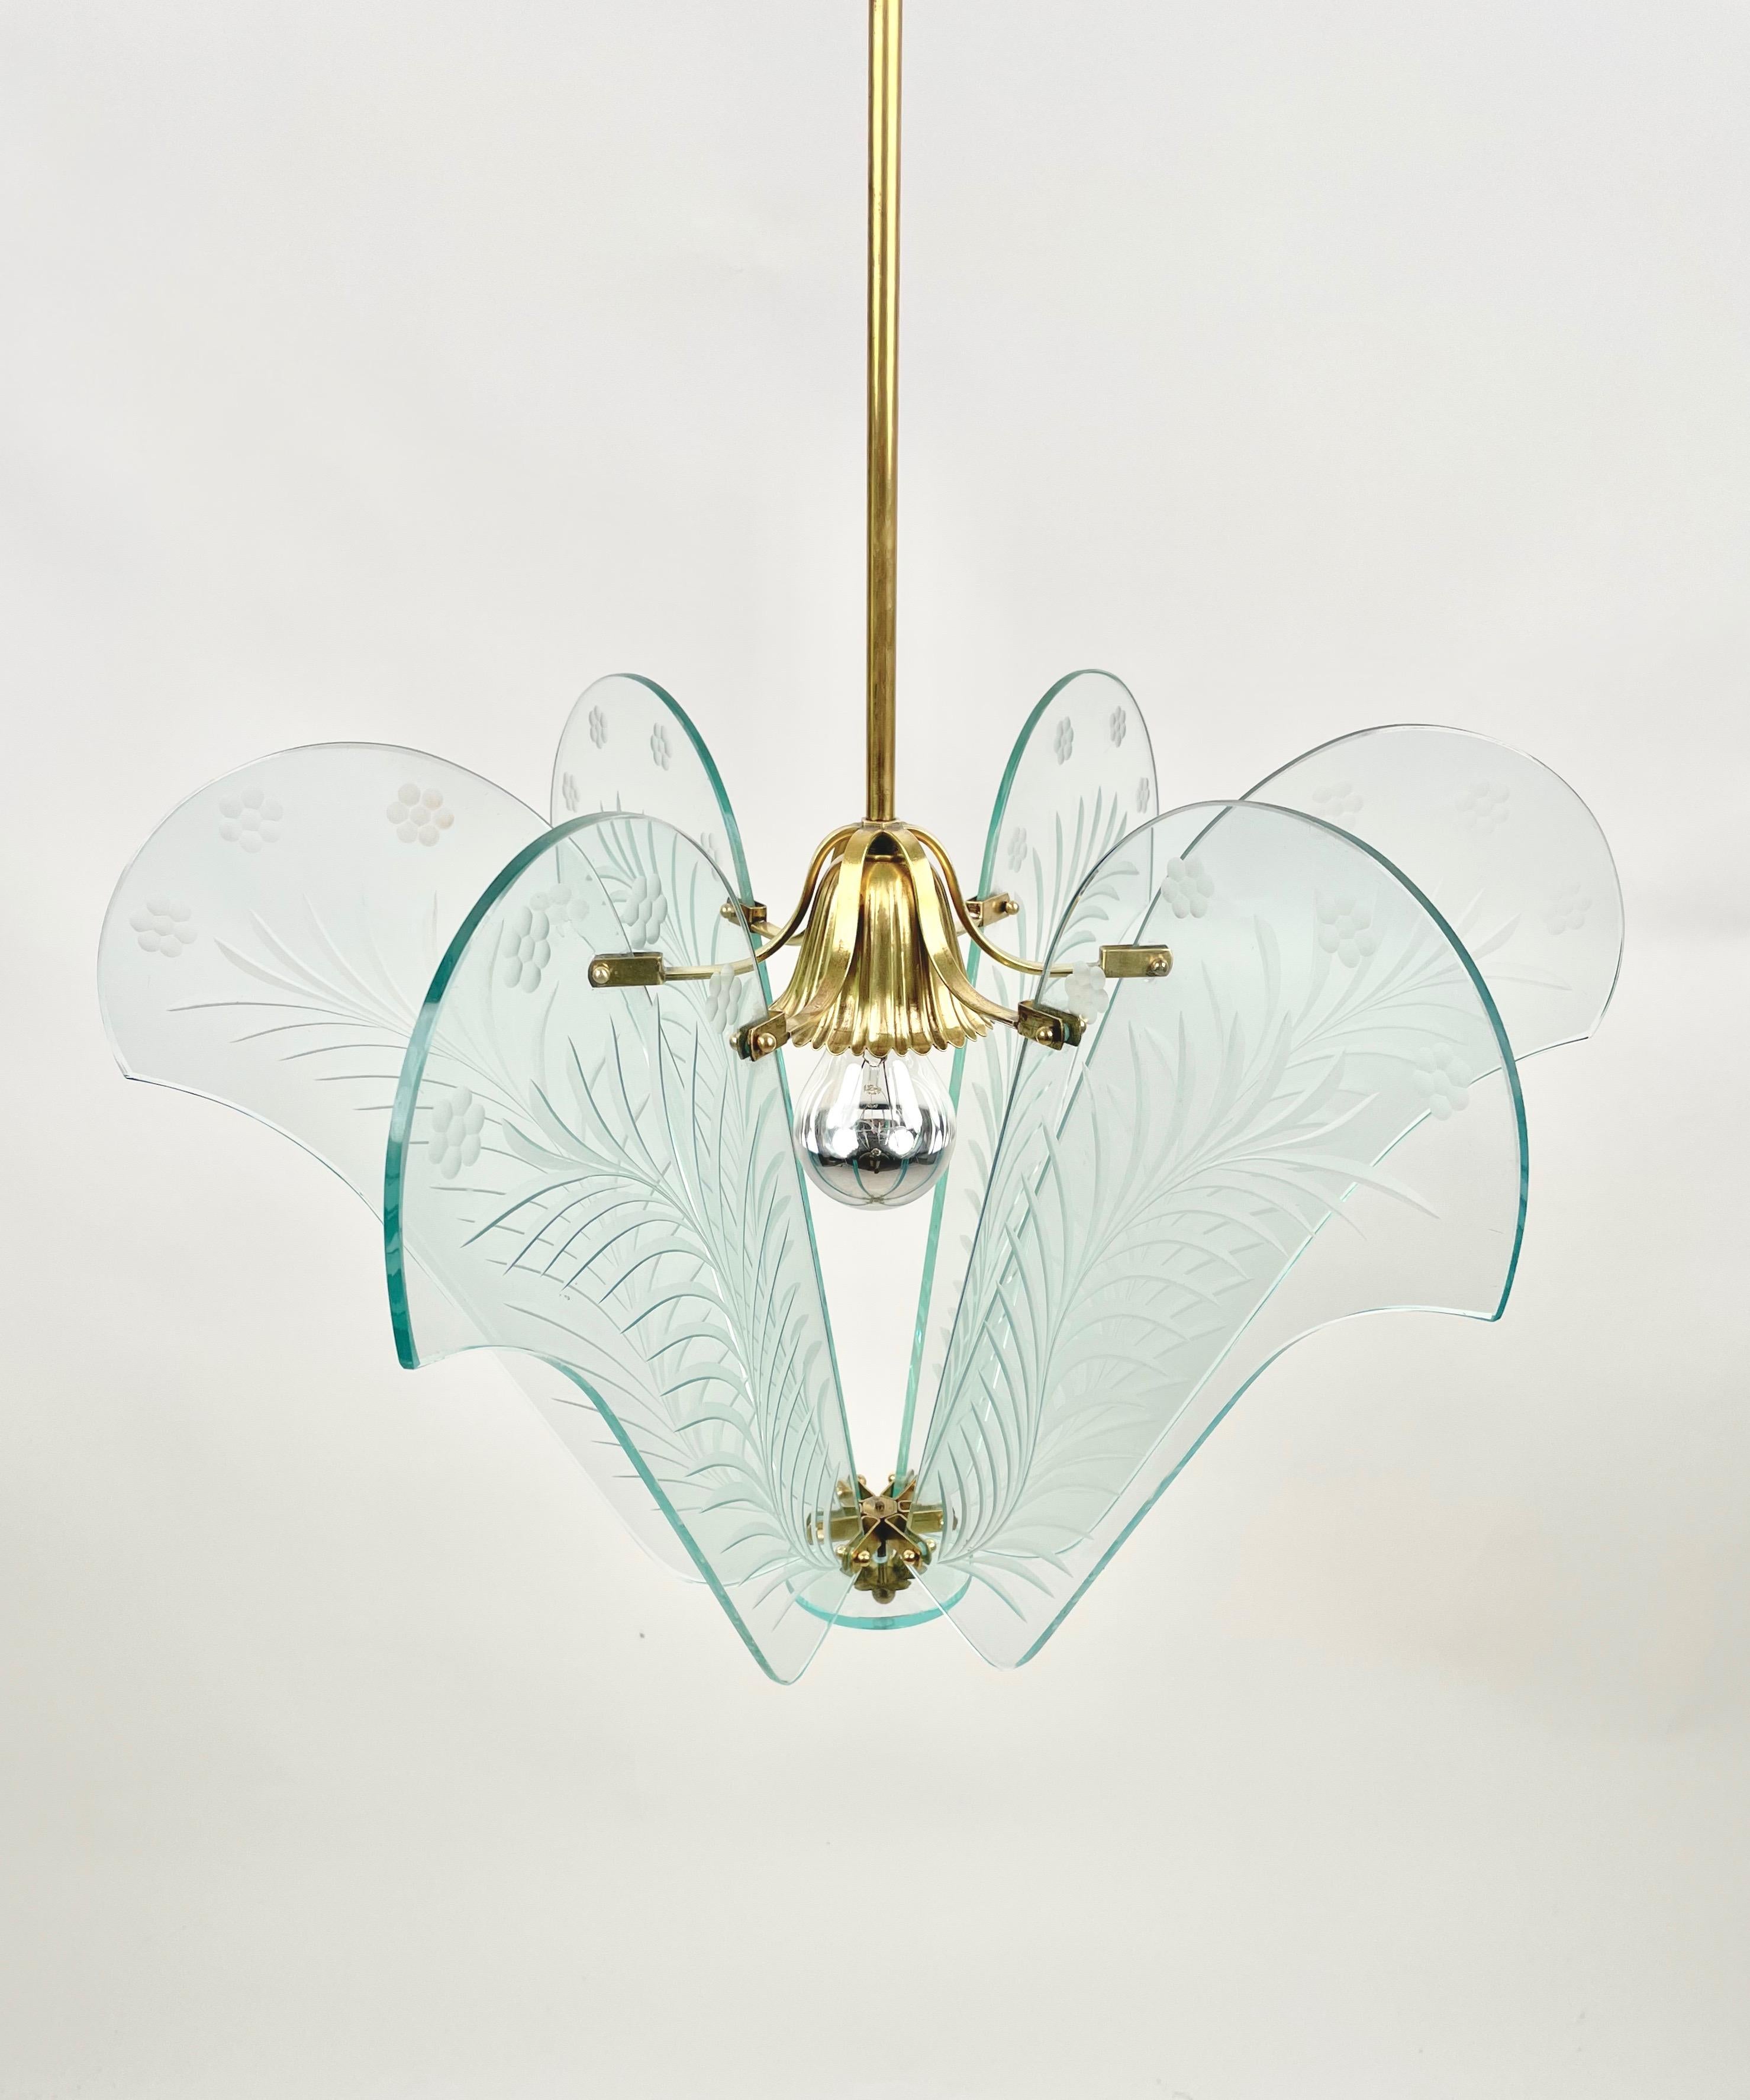 Chandelier pendant in glass with carved floral details and brass in the style of Fontana Arte. Made in Italy in the 1950s. 

Measures: Height with pole: 115 cm.
Height without pole: 32 cm.
Diameter: 53 cm.